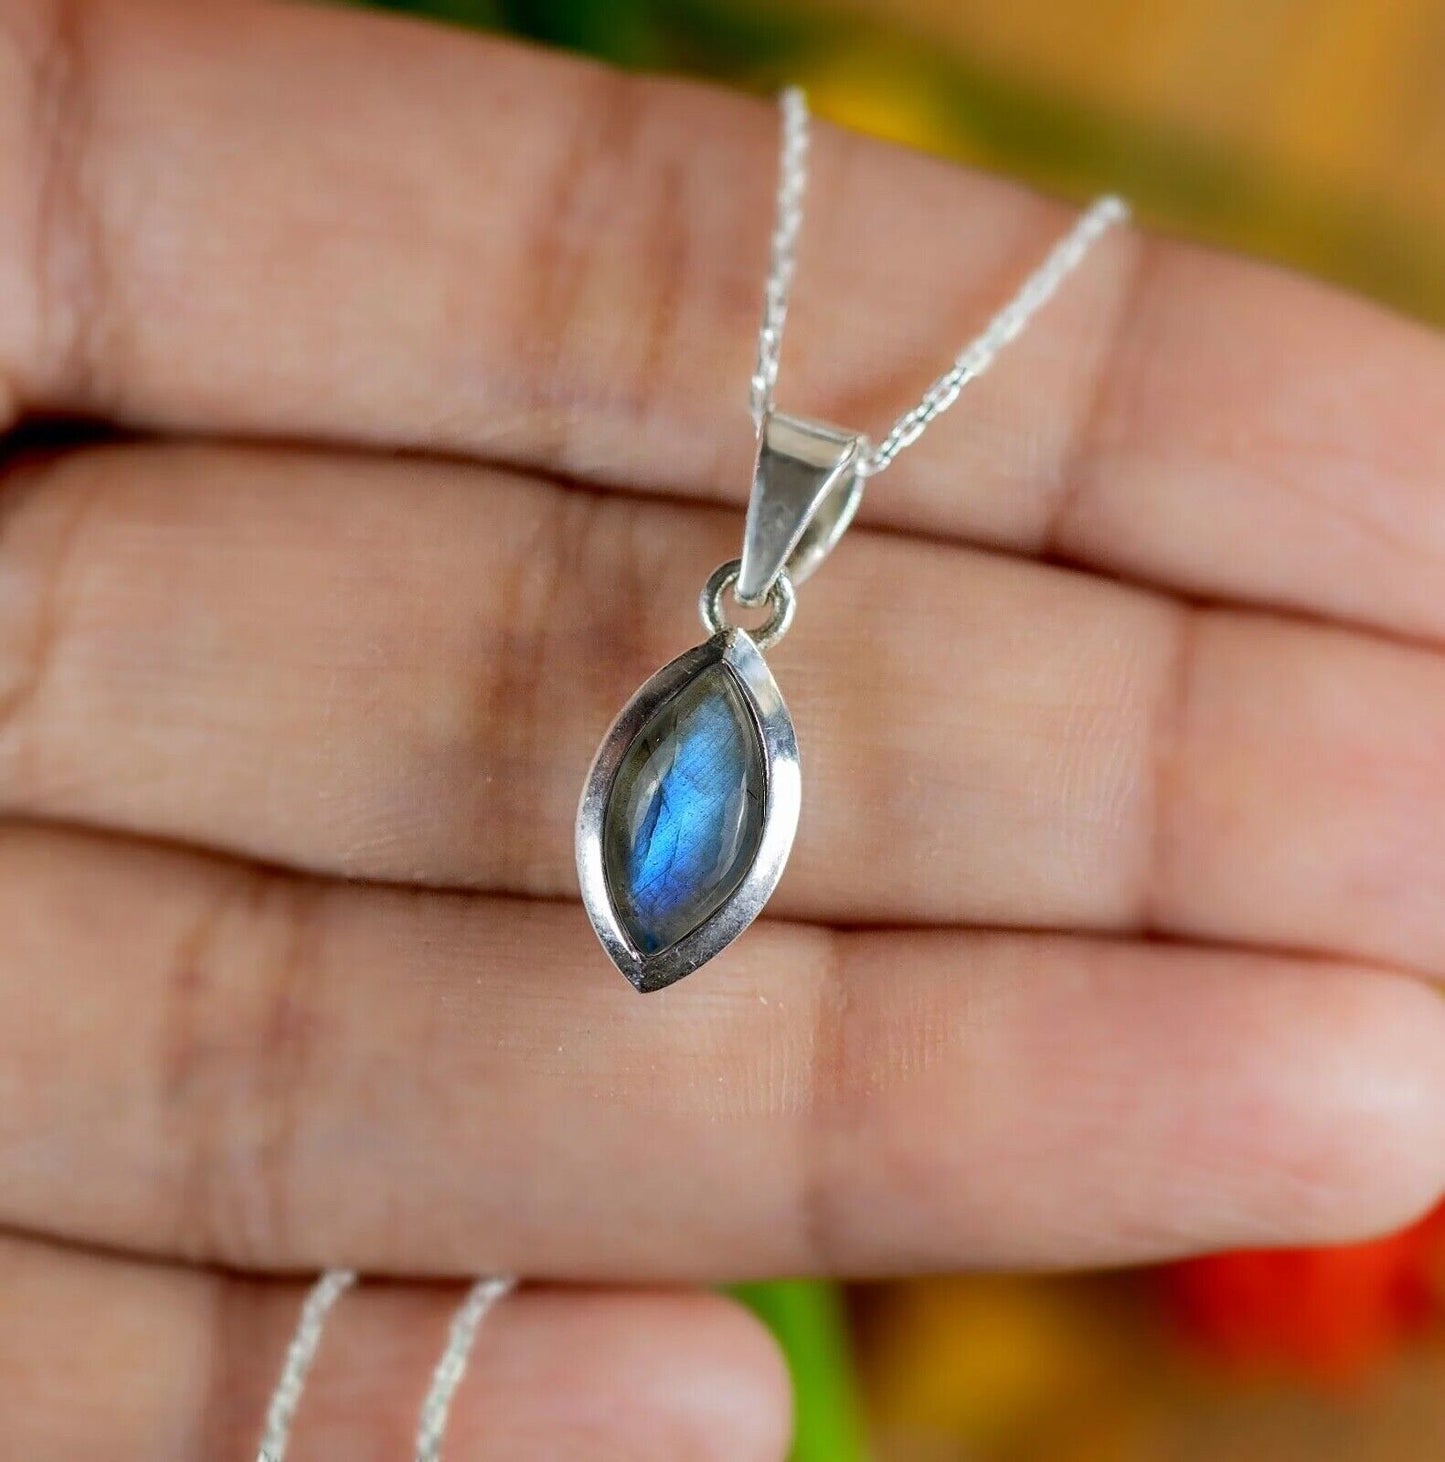 Sterling Silver 925 Marquise Cut Labradorite Pendant Necklace Ladies Jewellery